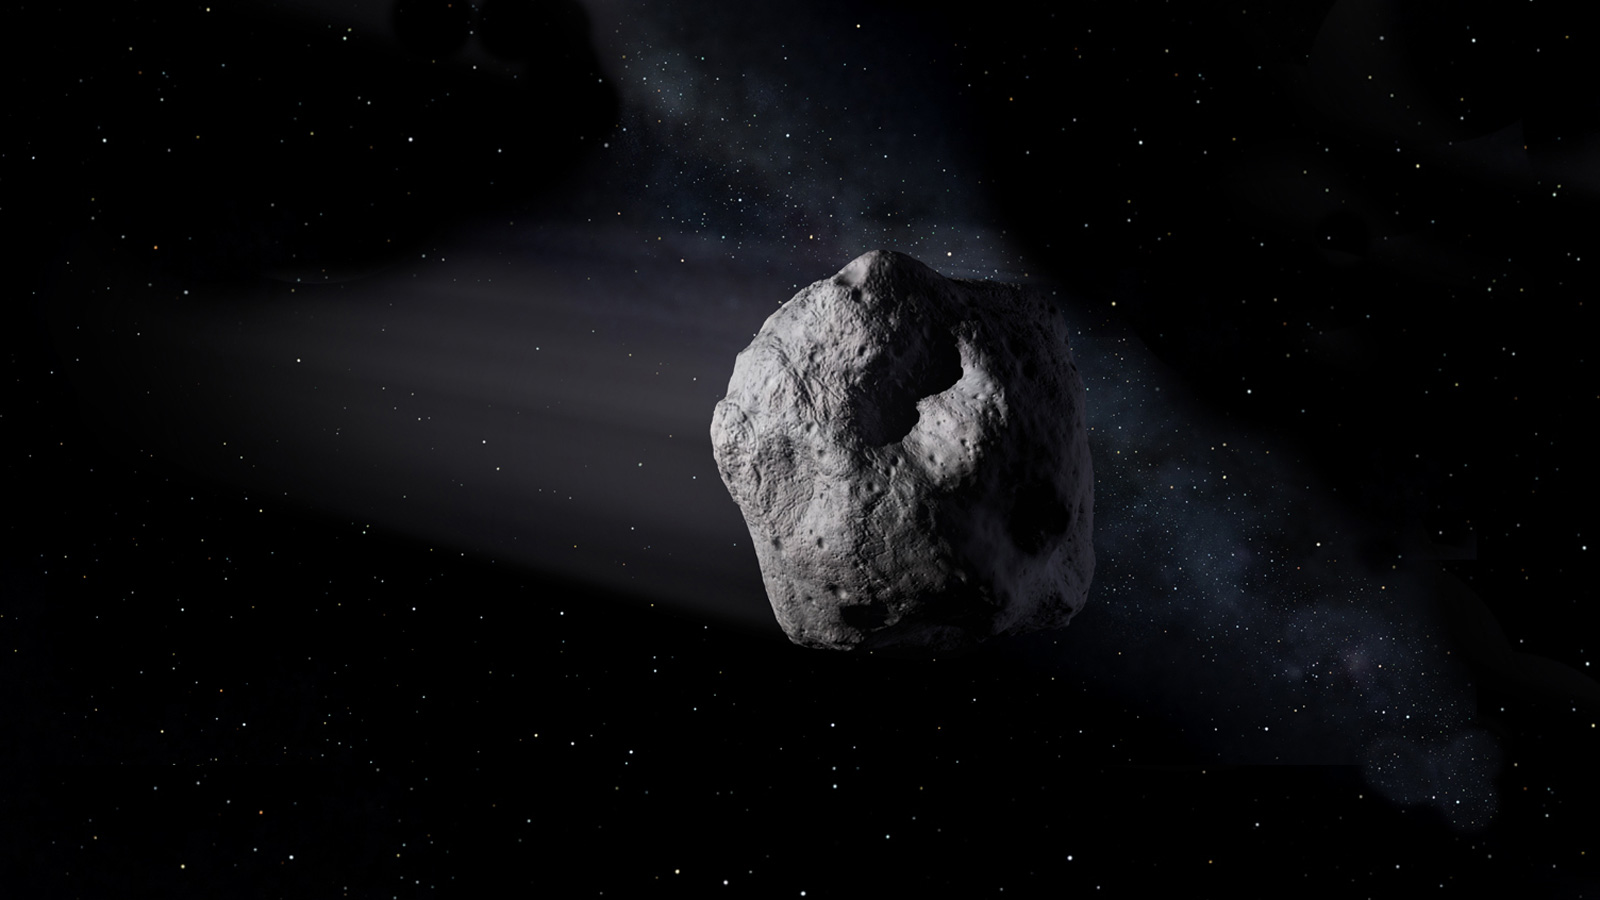 RV-dimension asteroid to gain nearer to Earth than the moon